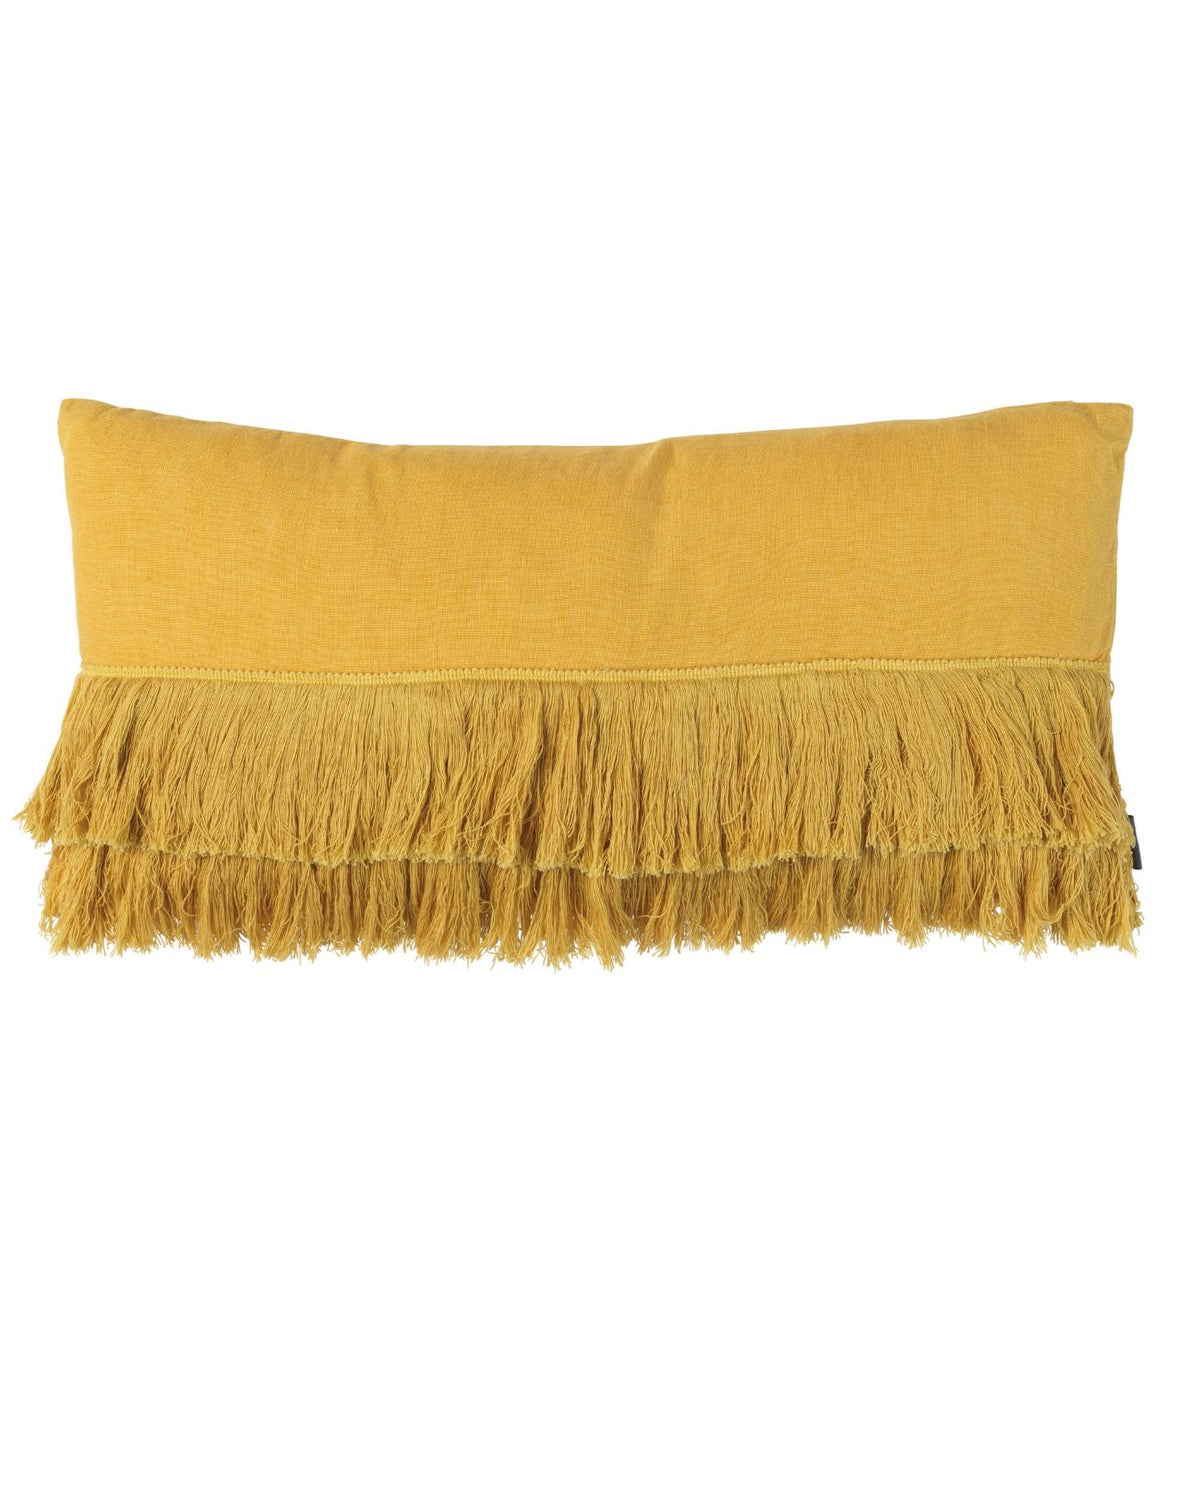 Finish off your kid's bed with this gorgeous fringe mustard cushion. Cushion comes filled and cover can be zipped off and washed.  40 x 60cm